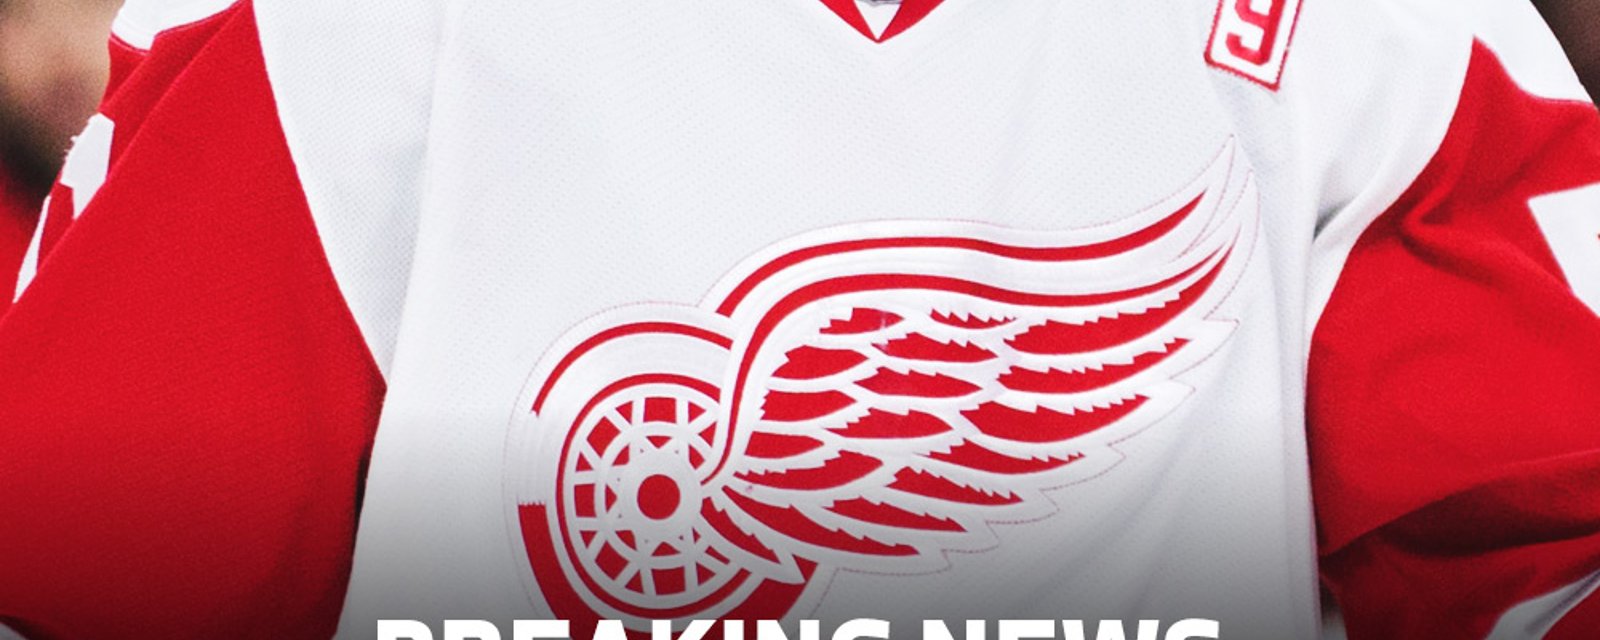 BREAKING NEWS: Ken Holland confirms center player is out for the rest of the season.